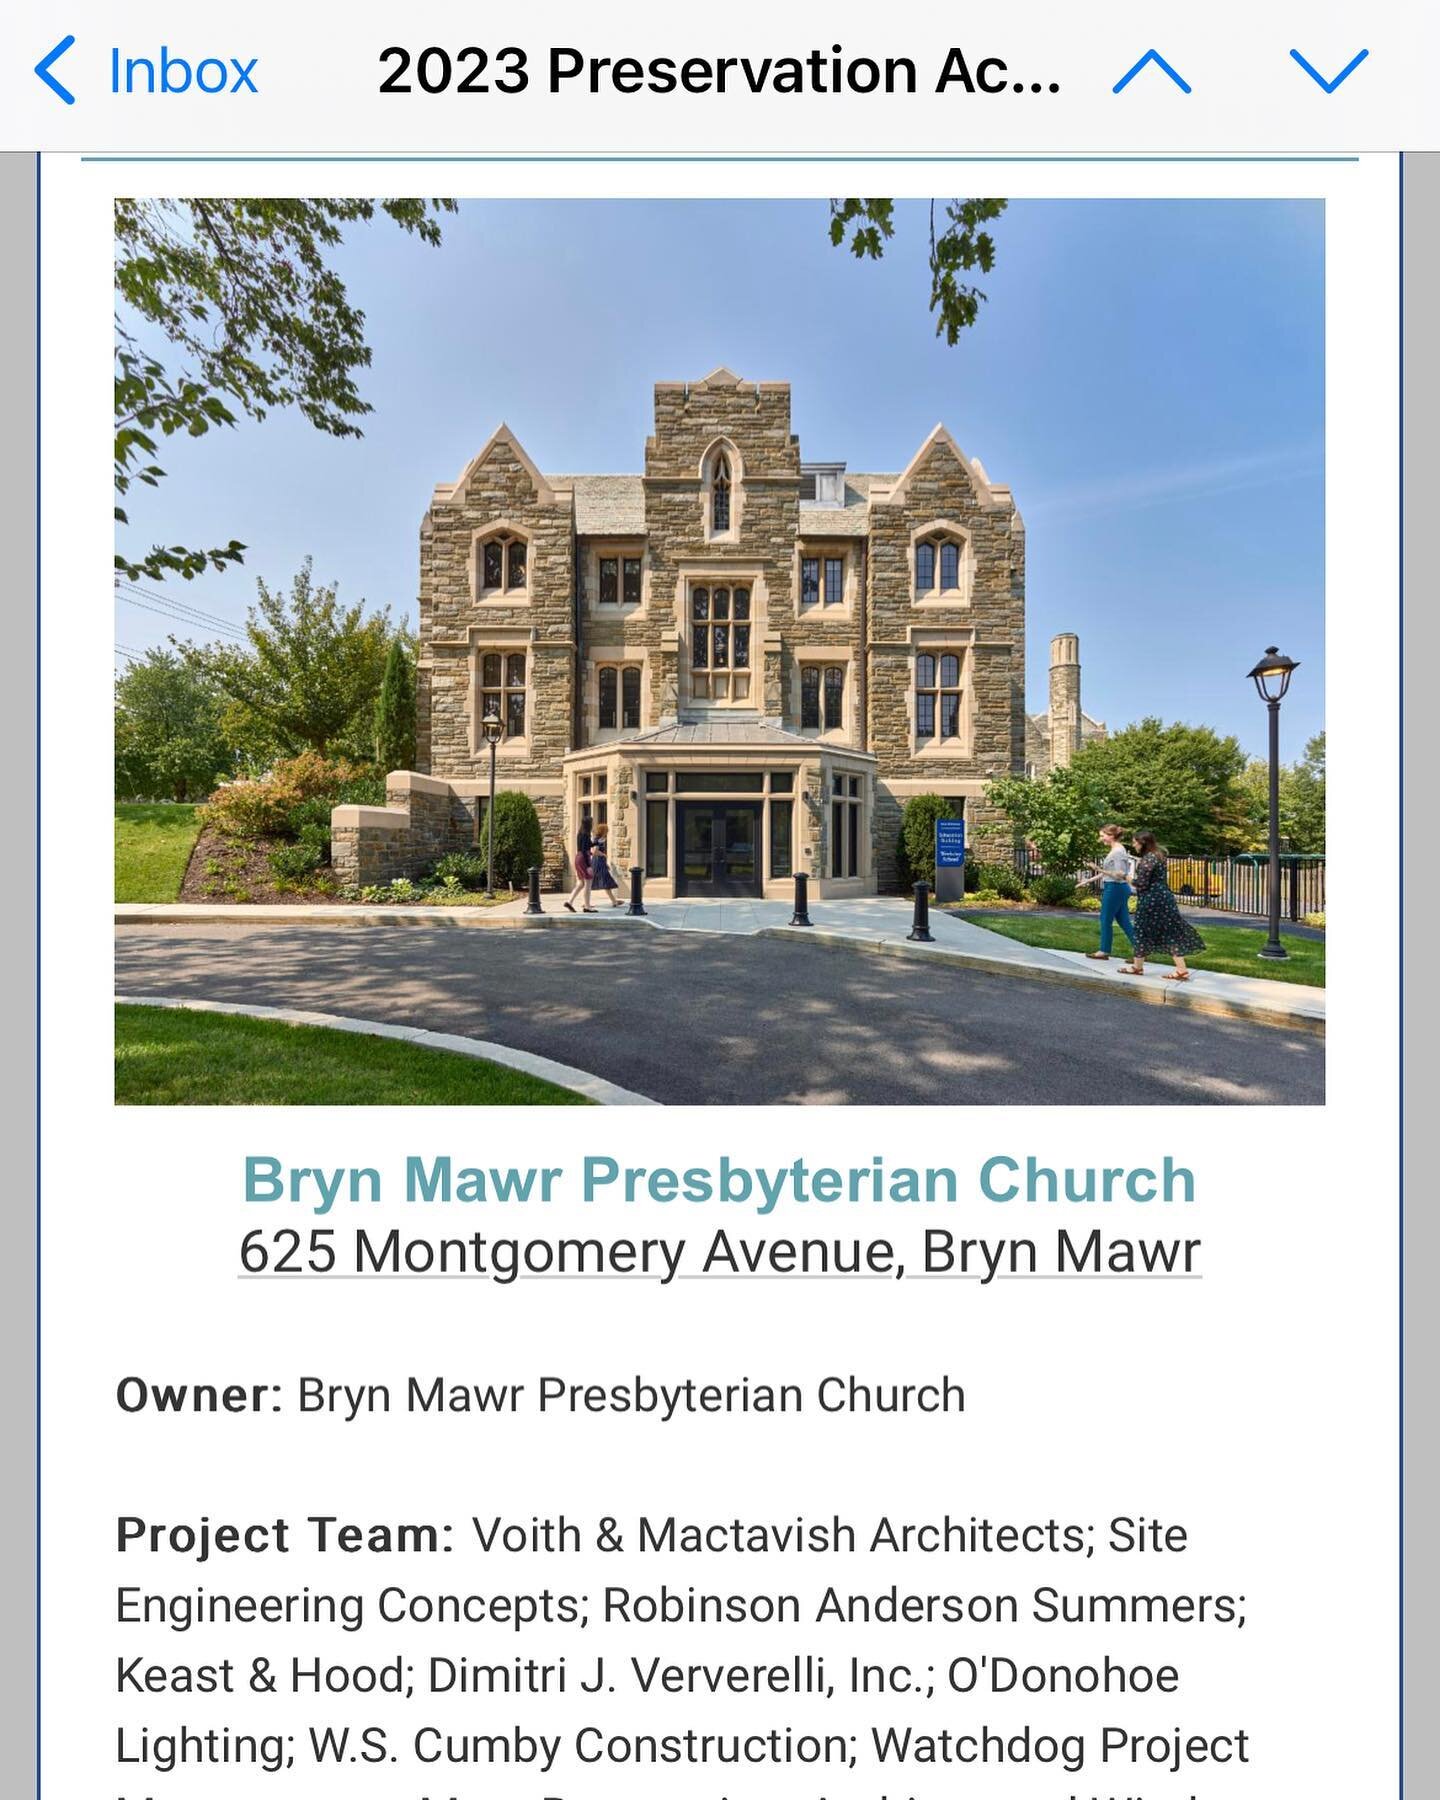 What a special email to see this morning from the @presalliancephl for the inclusion of @brynmawrpres in the 2023 Preservation Achievement Awards - Grand Jury Award Winners! We are grateful to have been on this project team led by @voithmactavish! cc